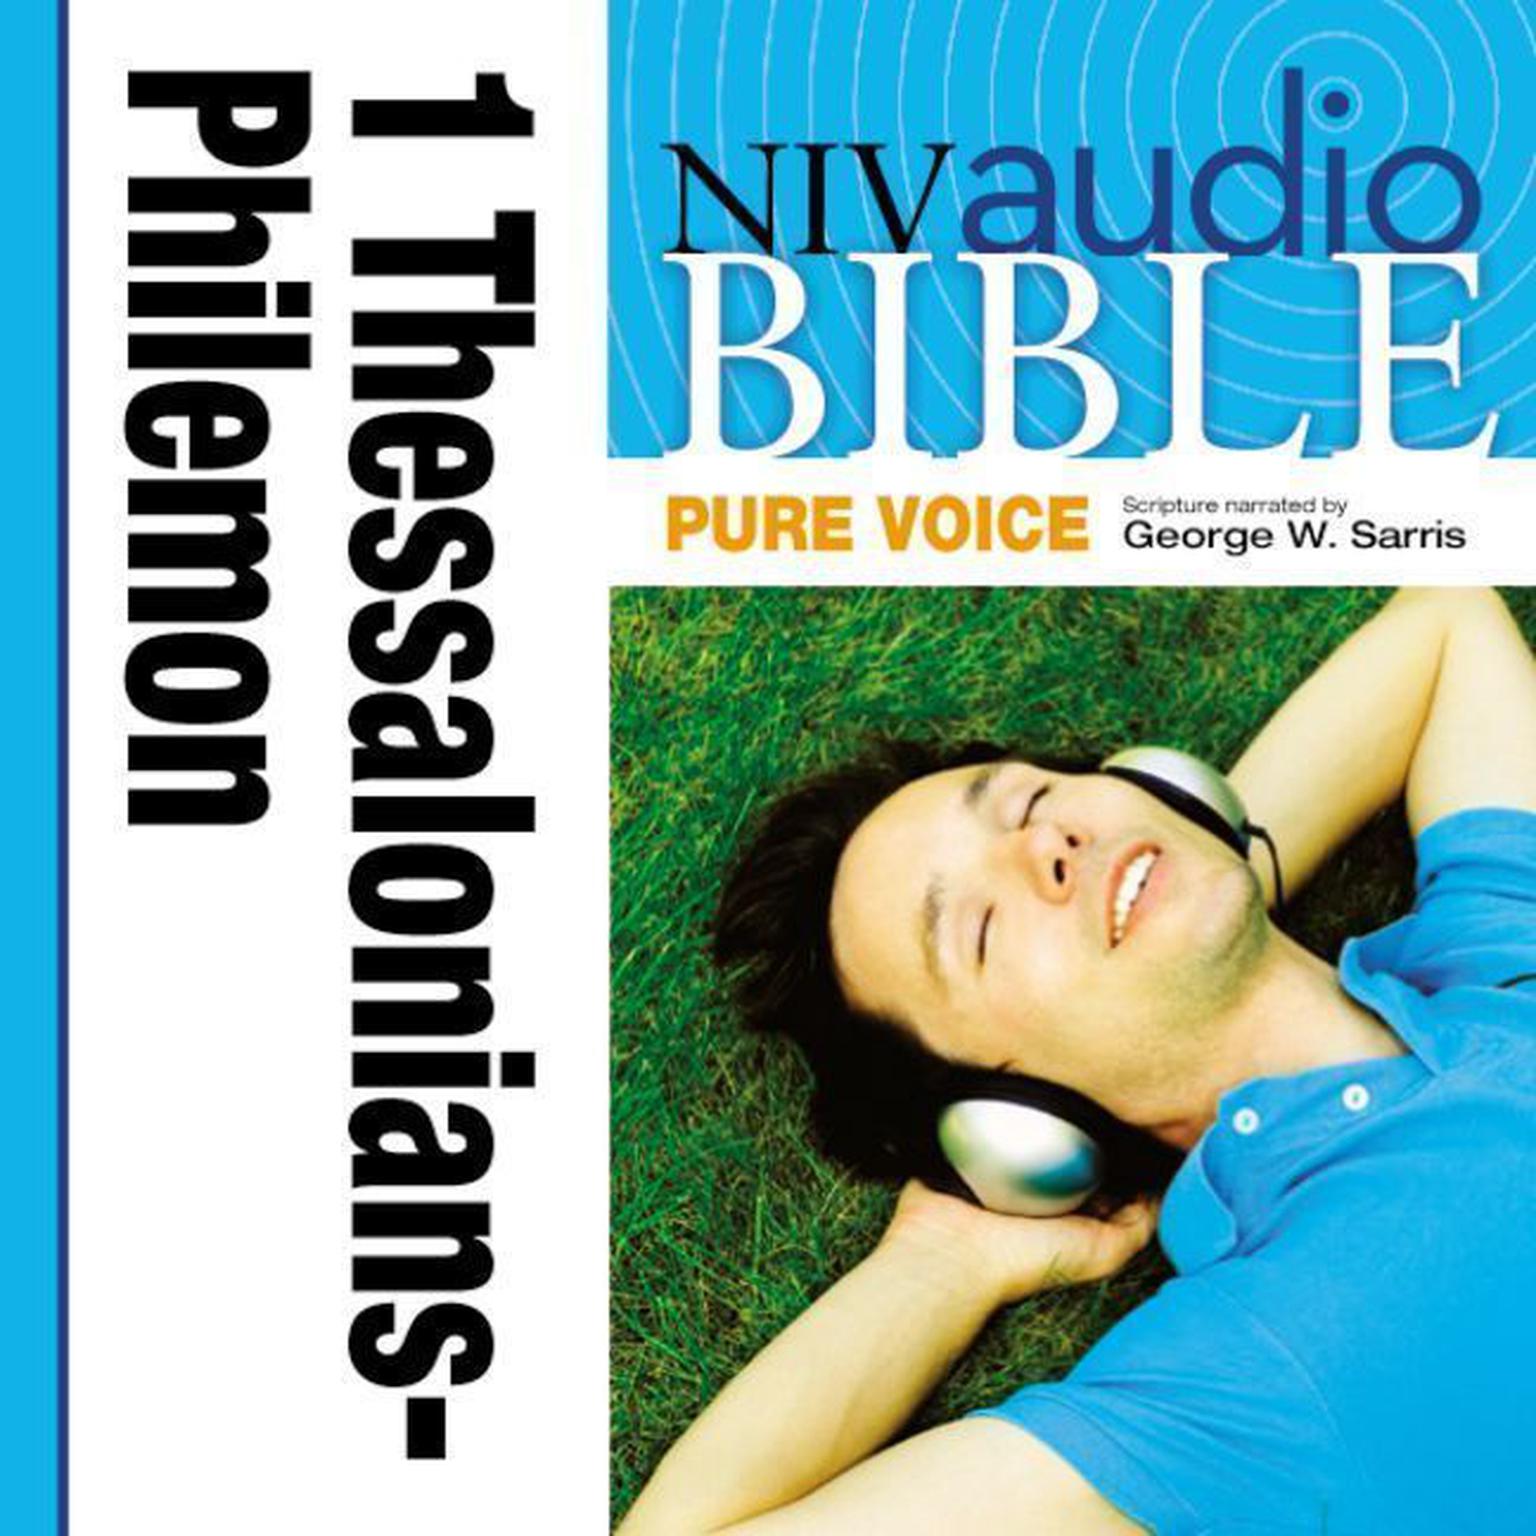 Pure Voice Audio Bible - New International Version, NIV (Narrated by George W. Sarris): (37) 1 and 2 Thessalonians, 1 and 2 Timothy, Titus, and Philemon Audiobook, by Zondervan